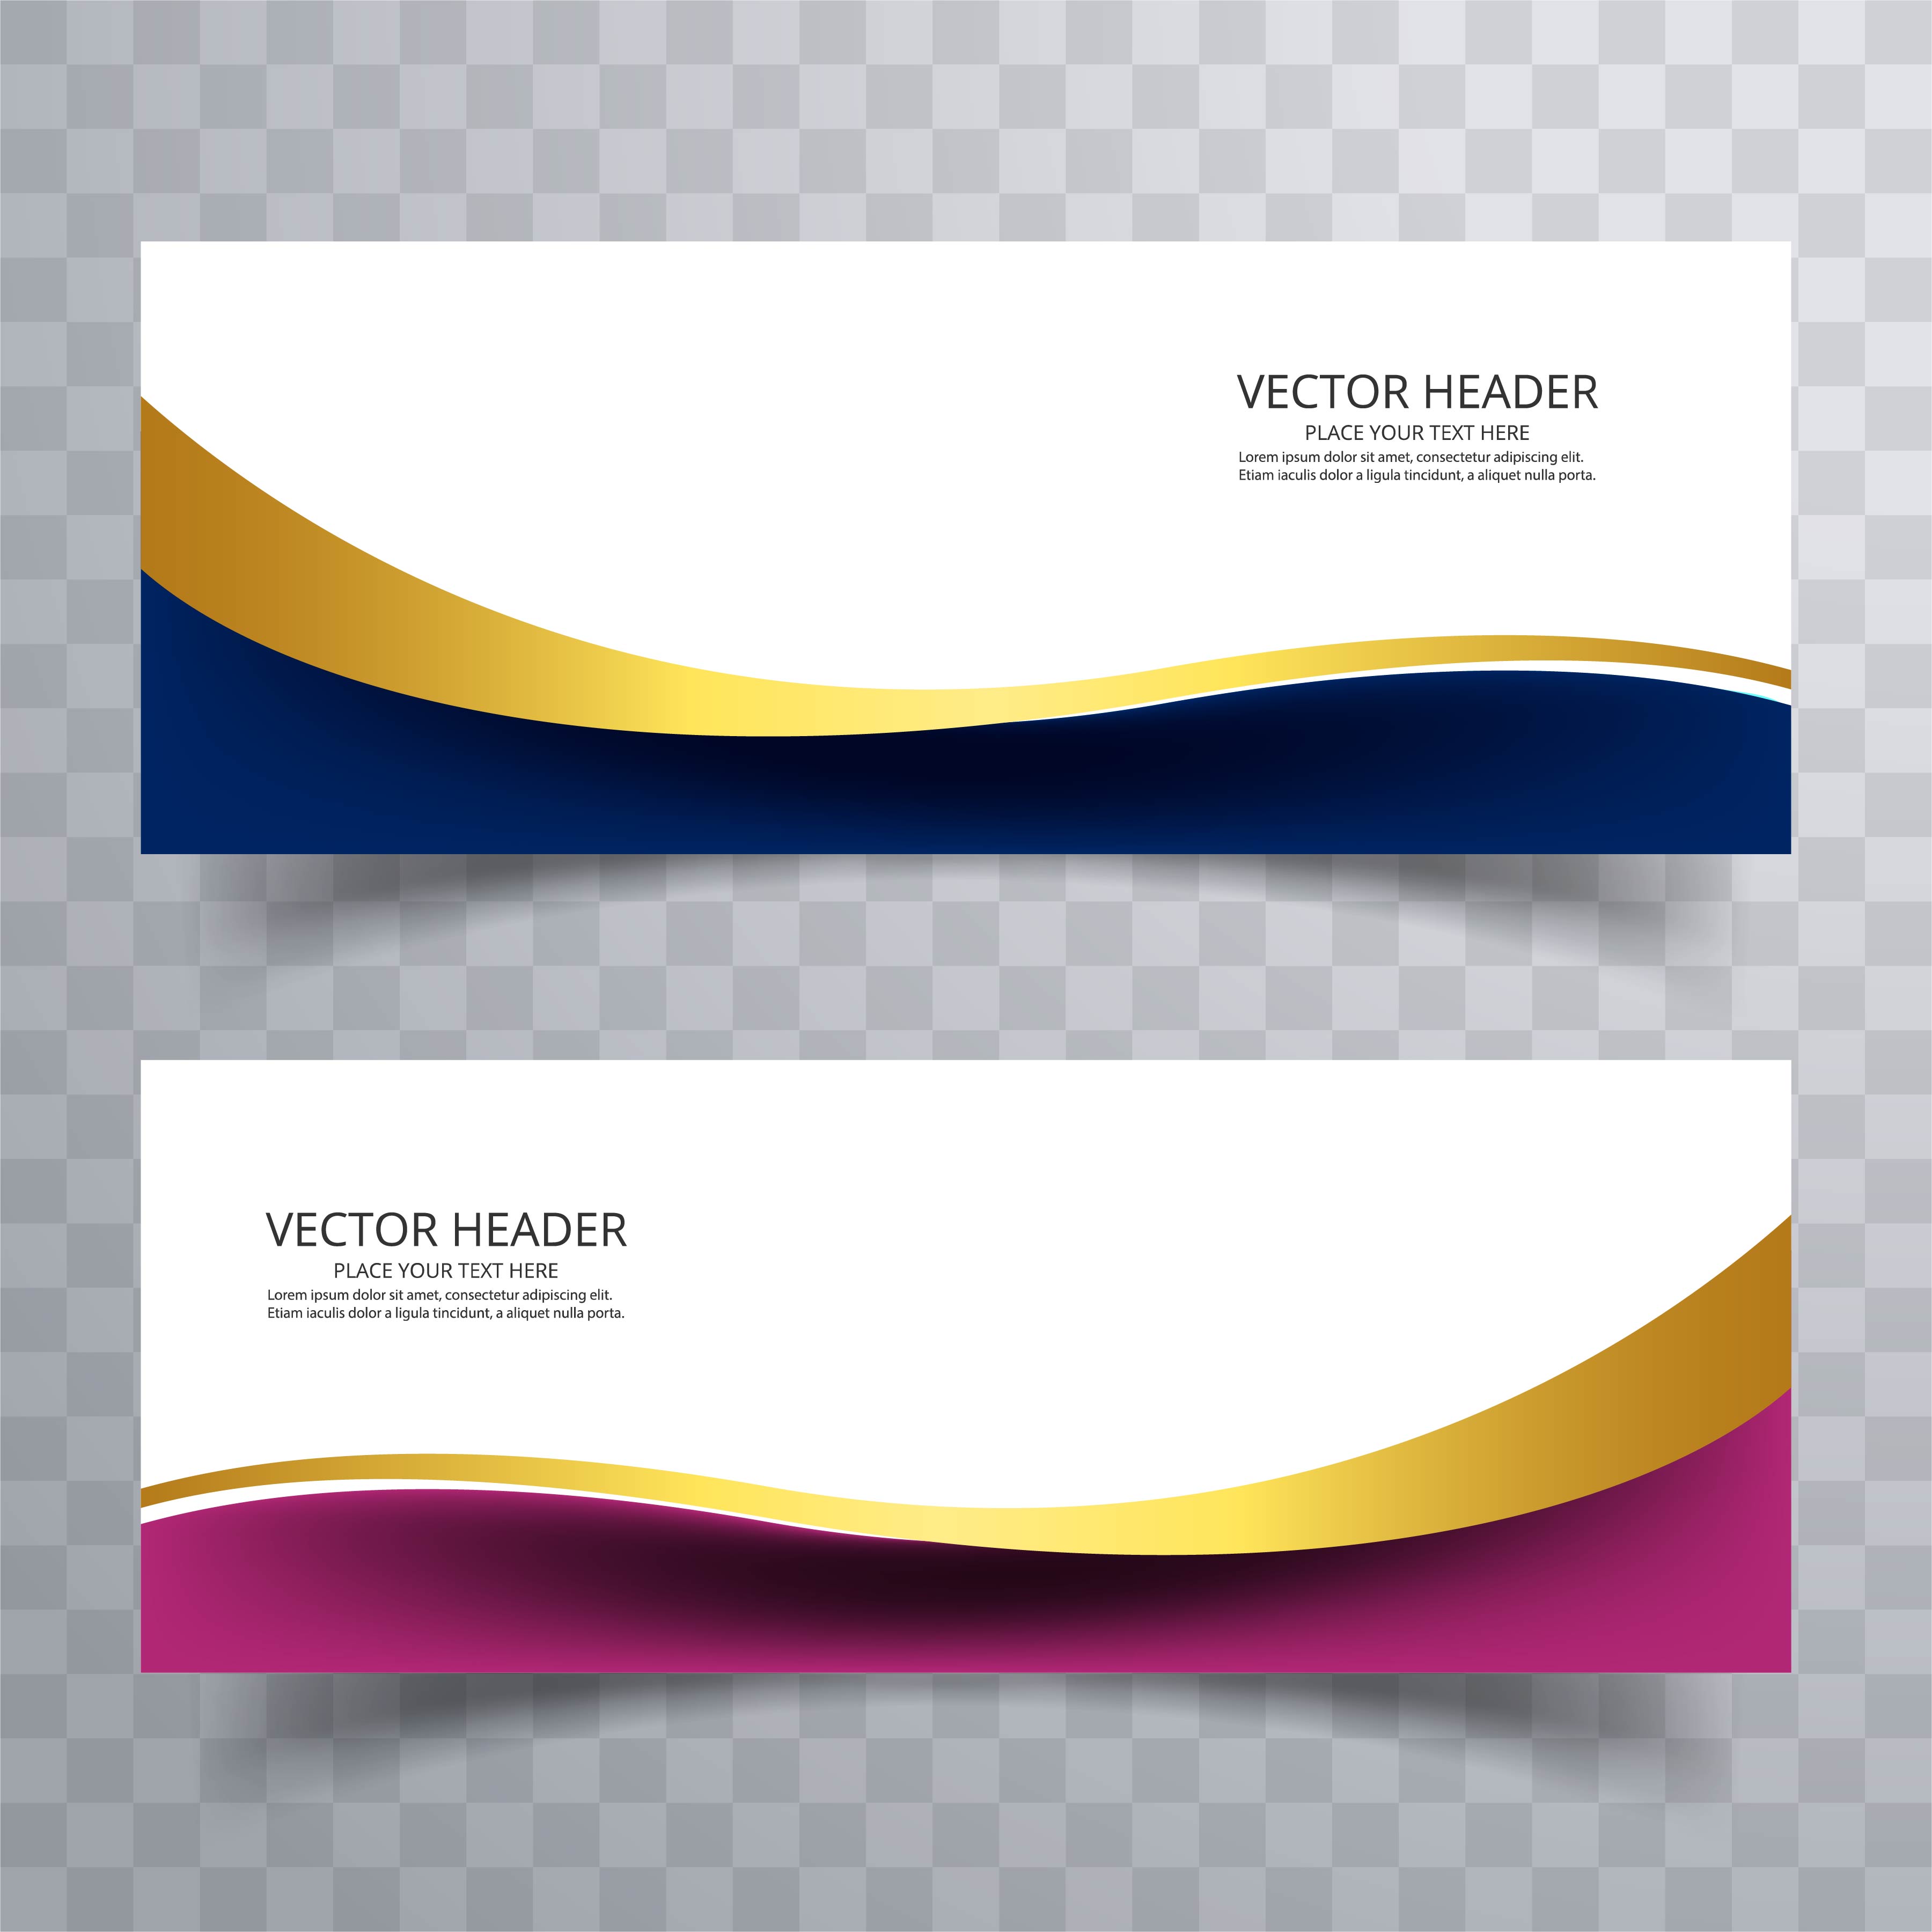 download-template-banner-ppdb-psd-viewer-imagesee